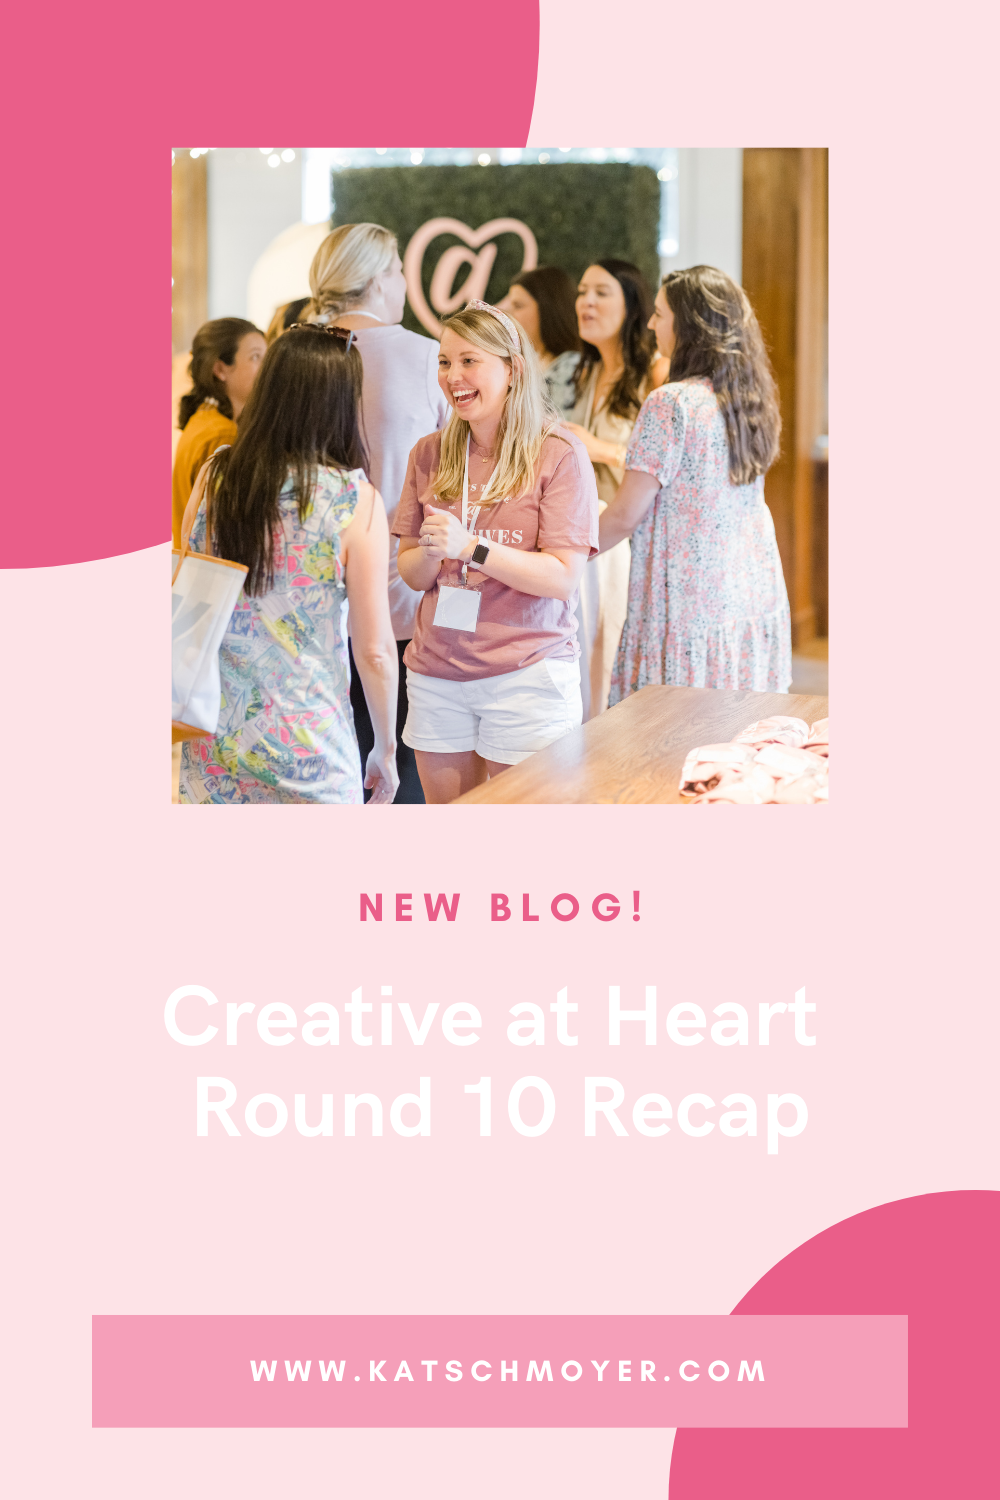 Creative at Heart Round 10 Recap: Episode featuring Kat Schmoyer and Megan Martin on the Talking Small Business Podcast, about how Round 10 went for C@H, what planning a conference is really like, and Kat's reflections on this round of Creative at Heart